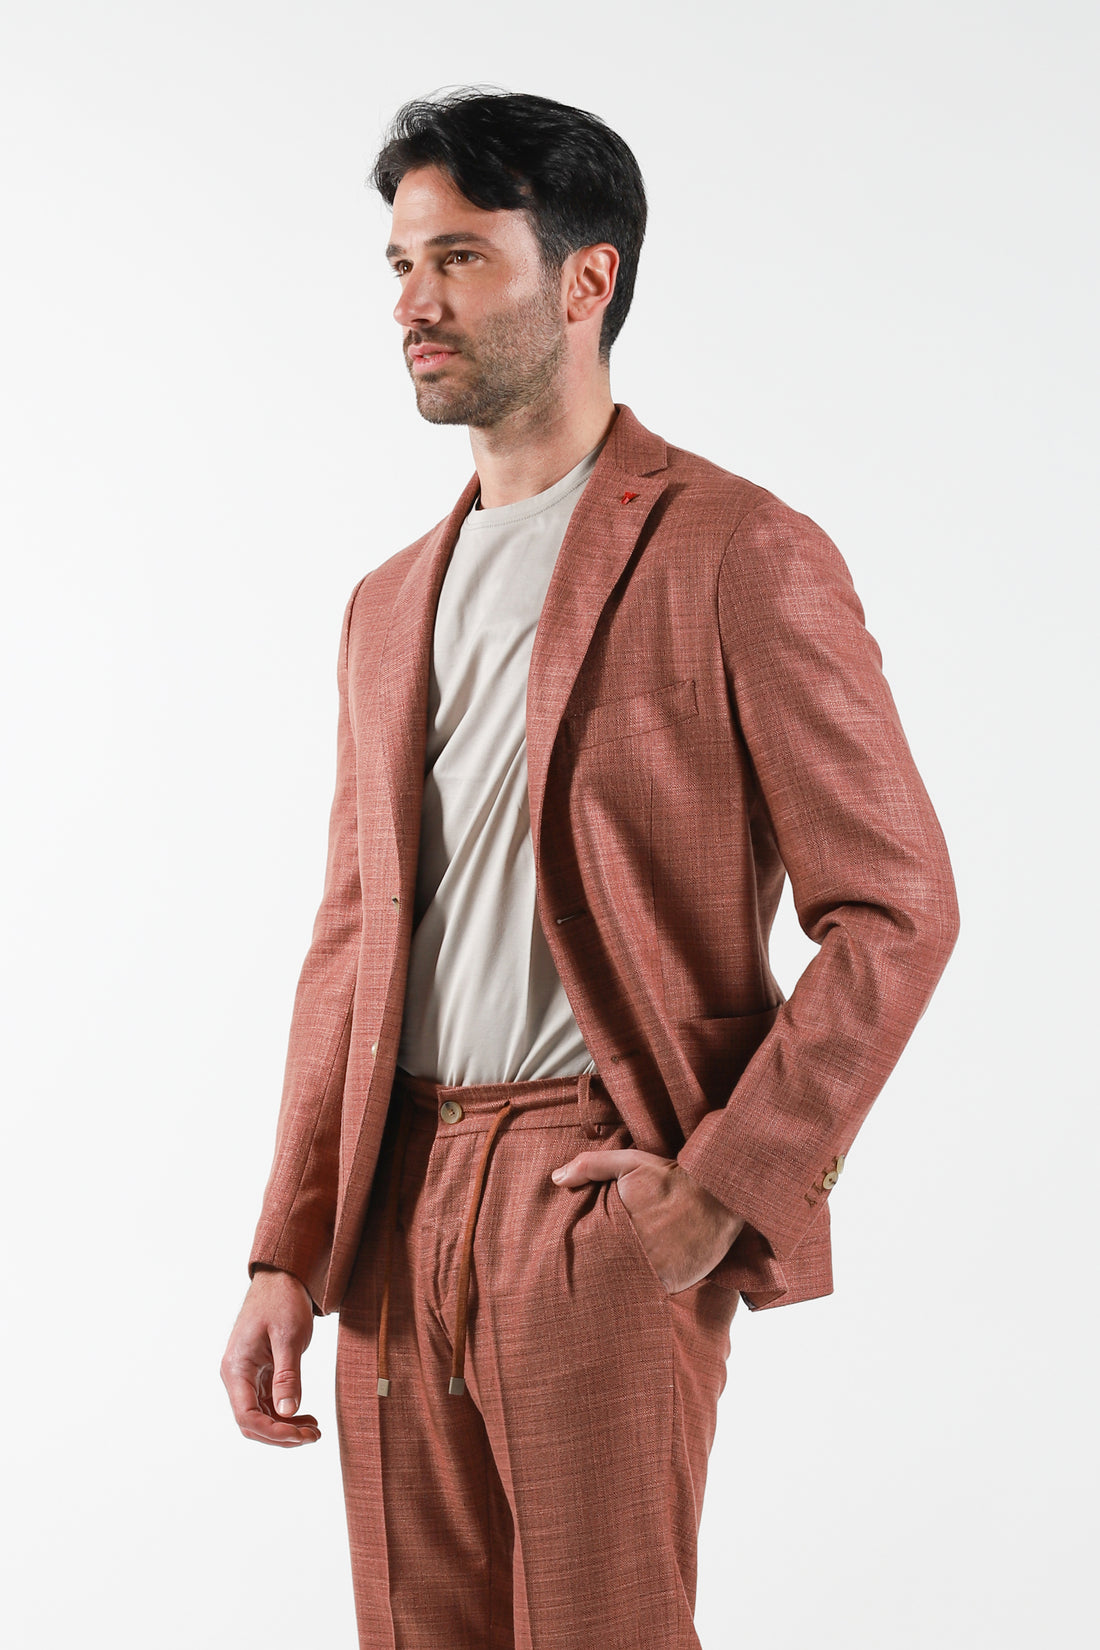 Single-breasted linen-effect suit in the color of Tegola